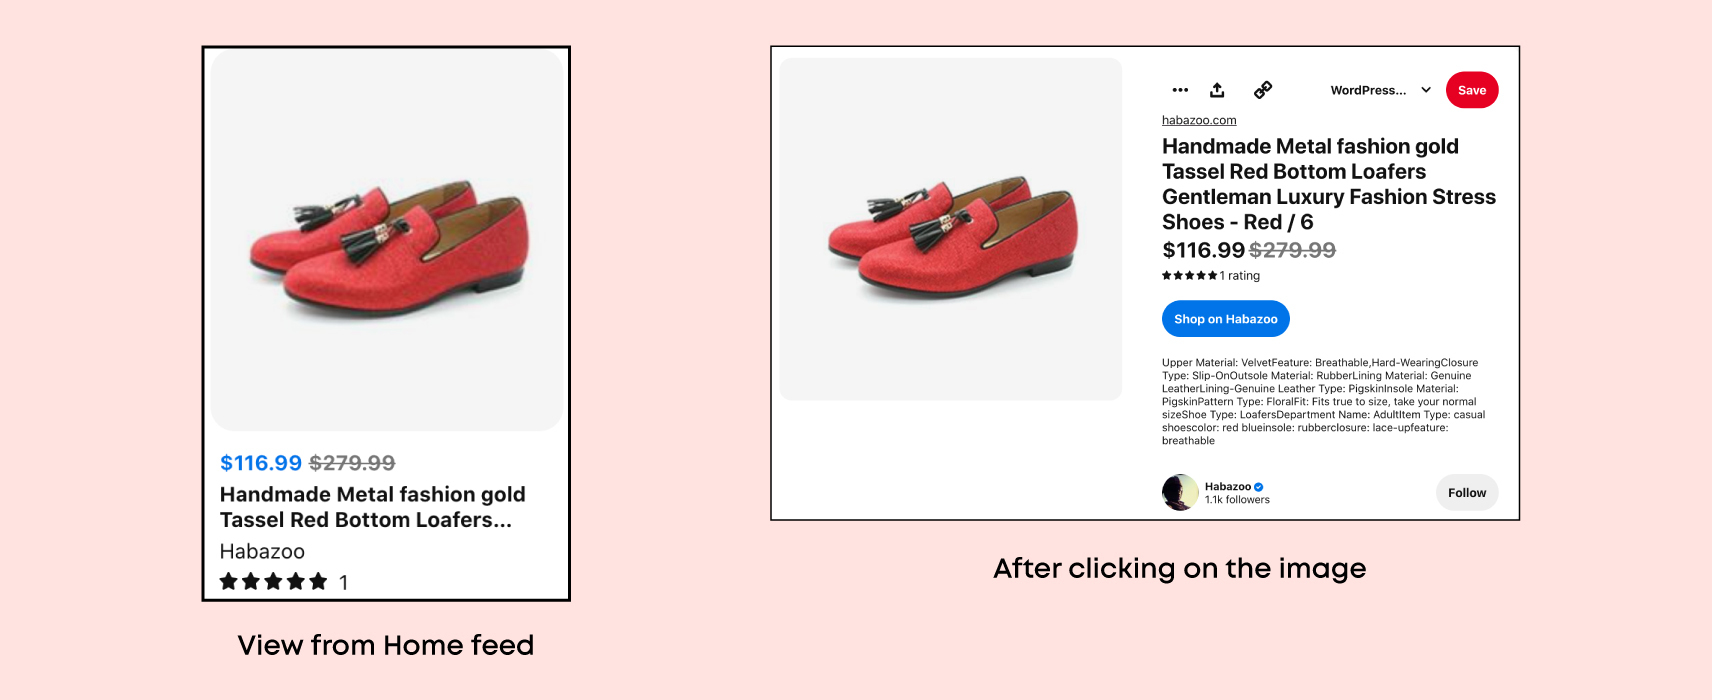 Pinterest Home and enlarged view - WooCommerce Pinterest Feed Plugin